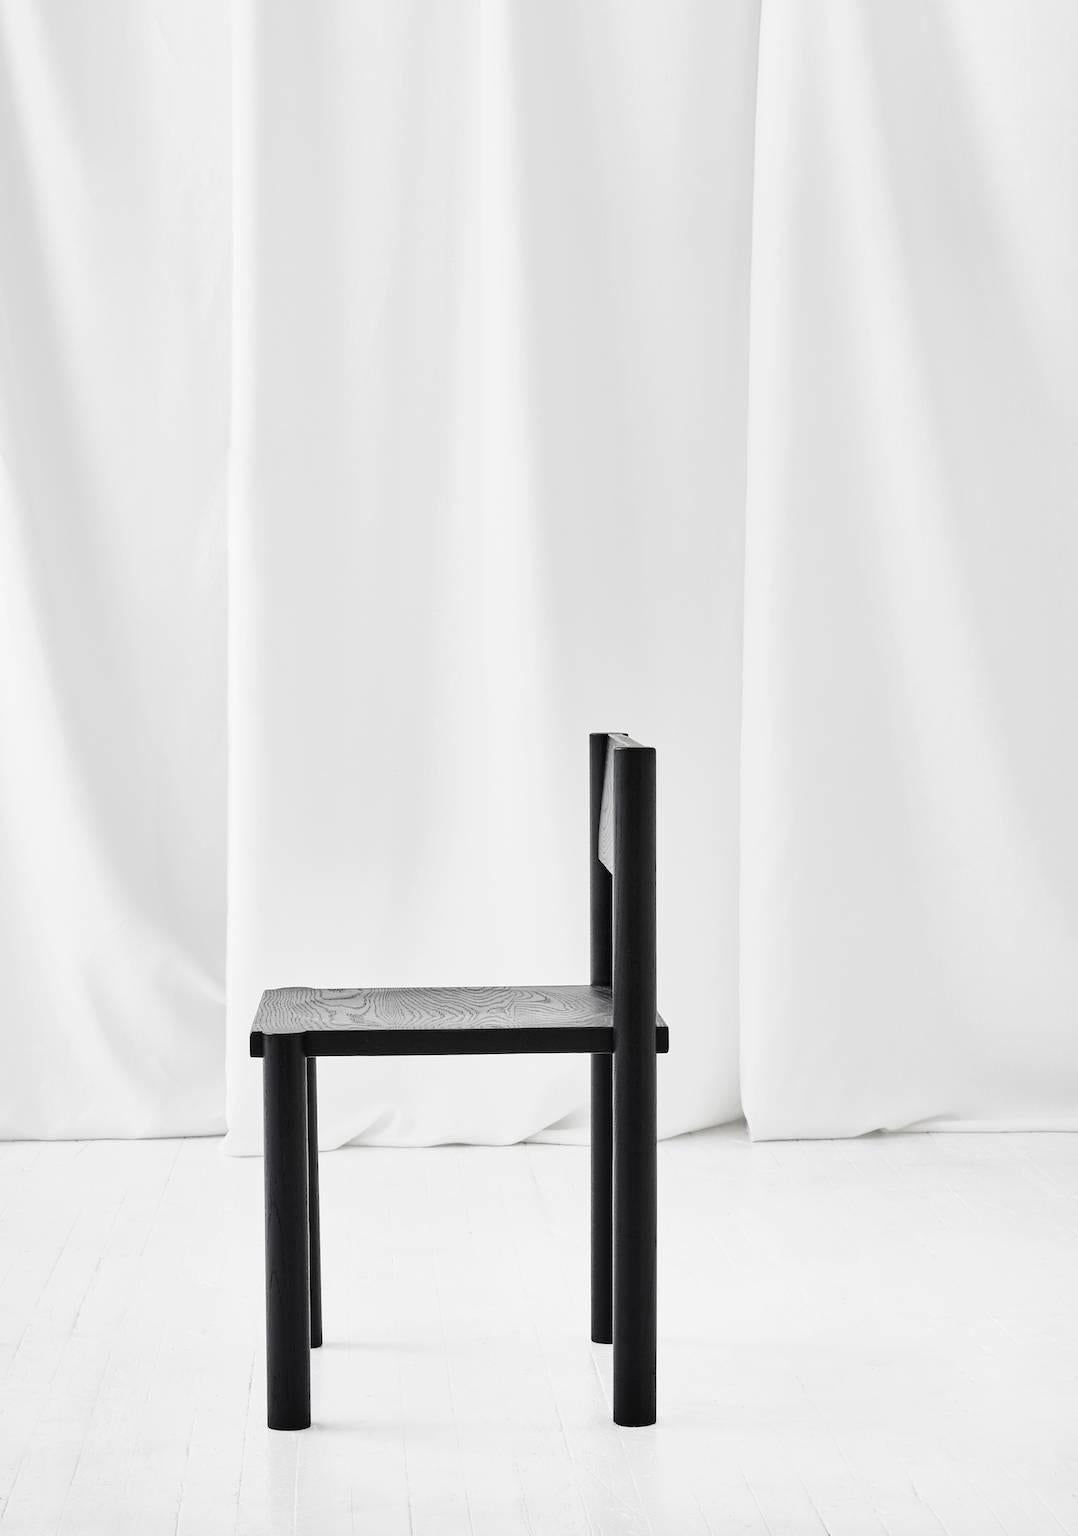 The WC6 chair by ASH NYC is a handsome chair with a low, wide and sturdy stance. The hand-turned legs join seamlessly with the seat to create an elegant, handcrafted joint that defies gravity. 

An exercise in Minimalist design, hidden joints